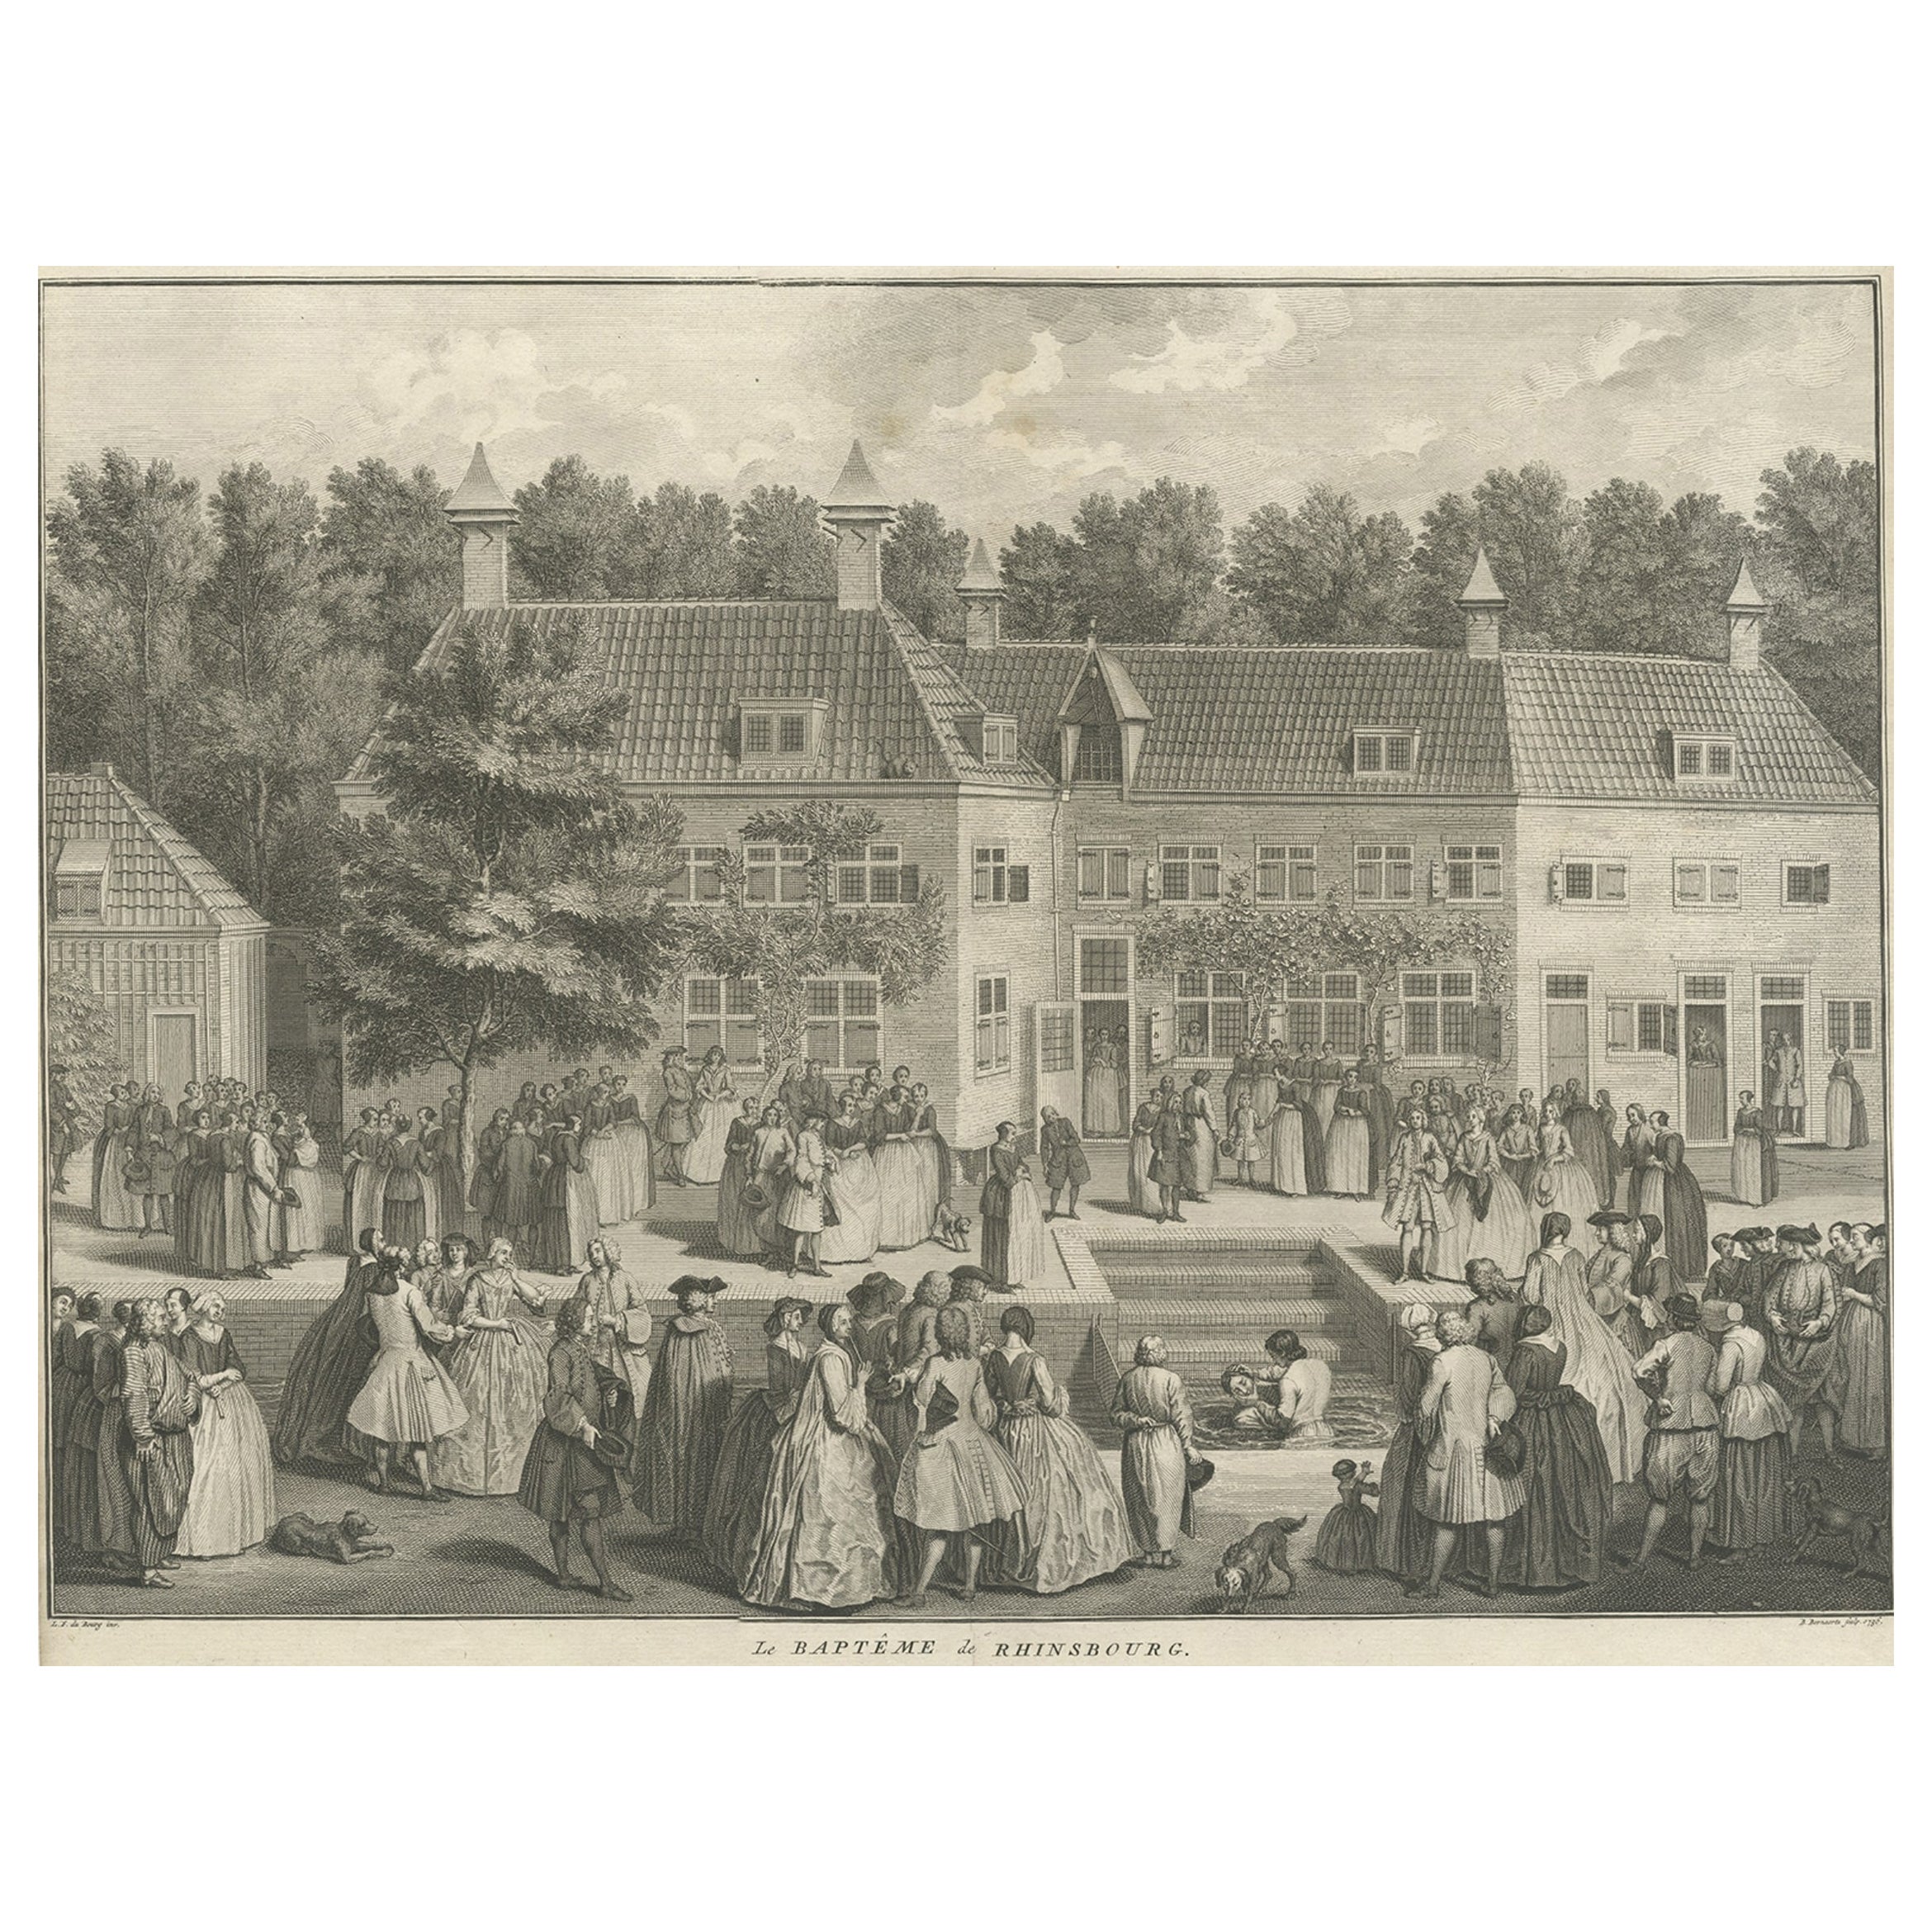 Original Antique Engraving of the Baptism of Christians in The Netherlands, 17 For Sale